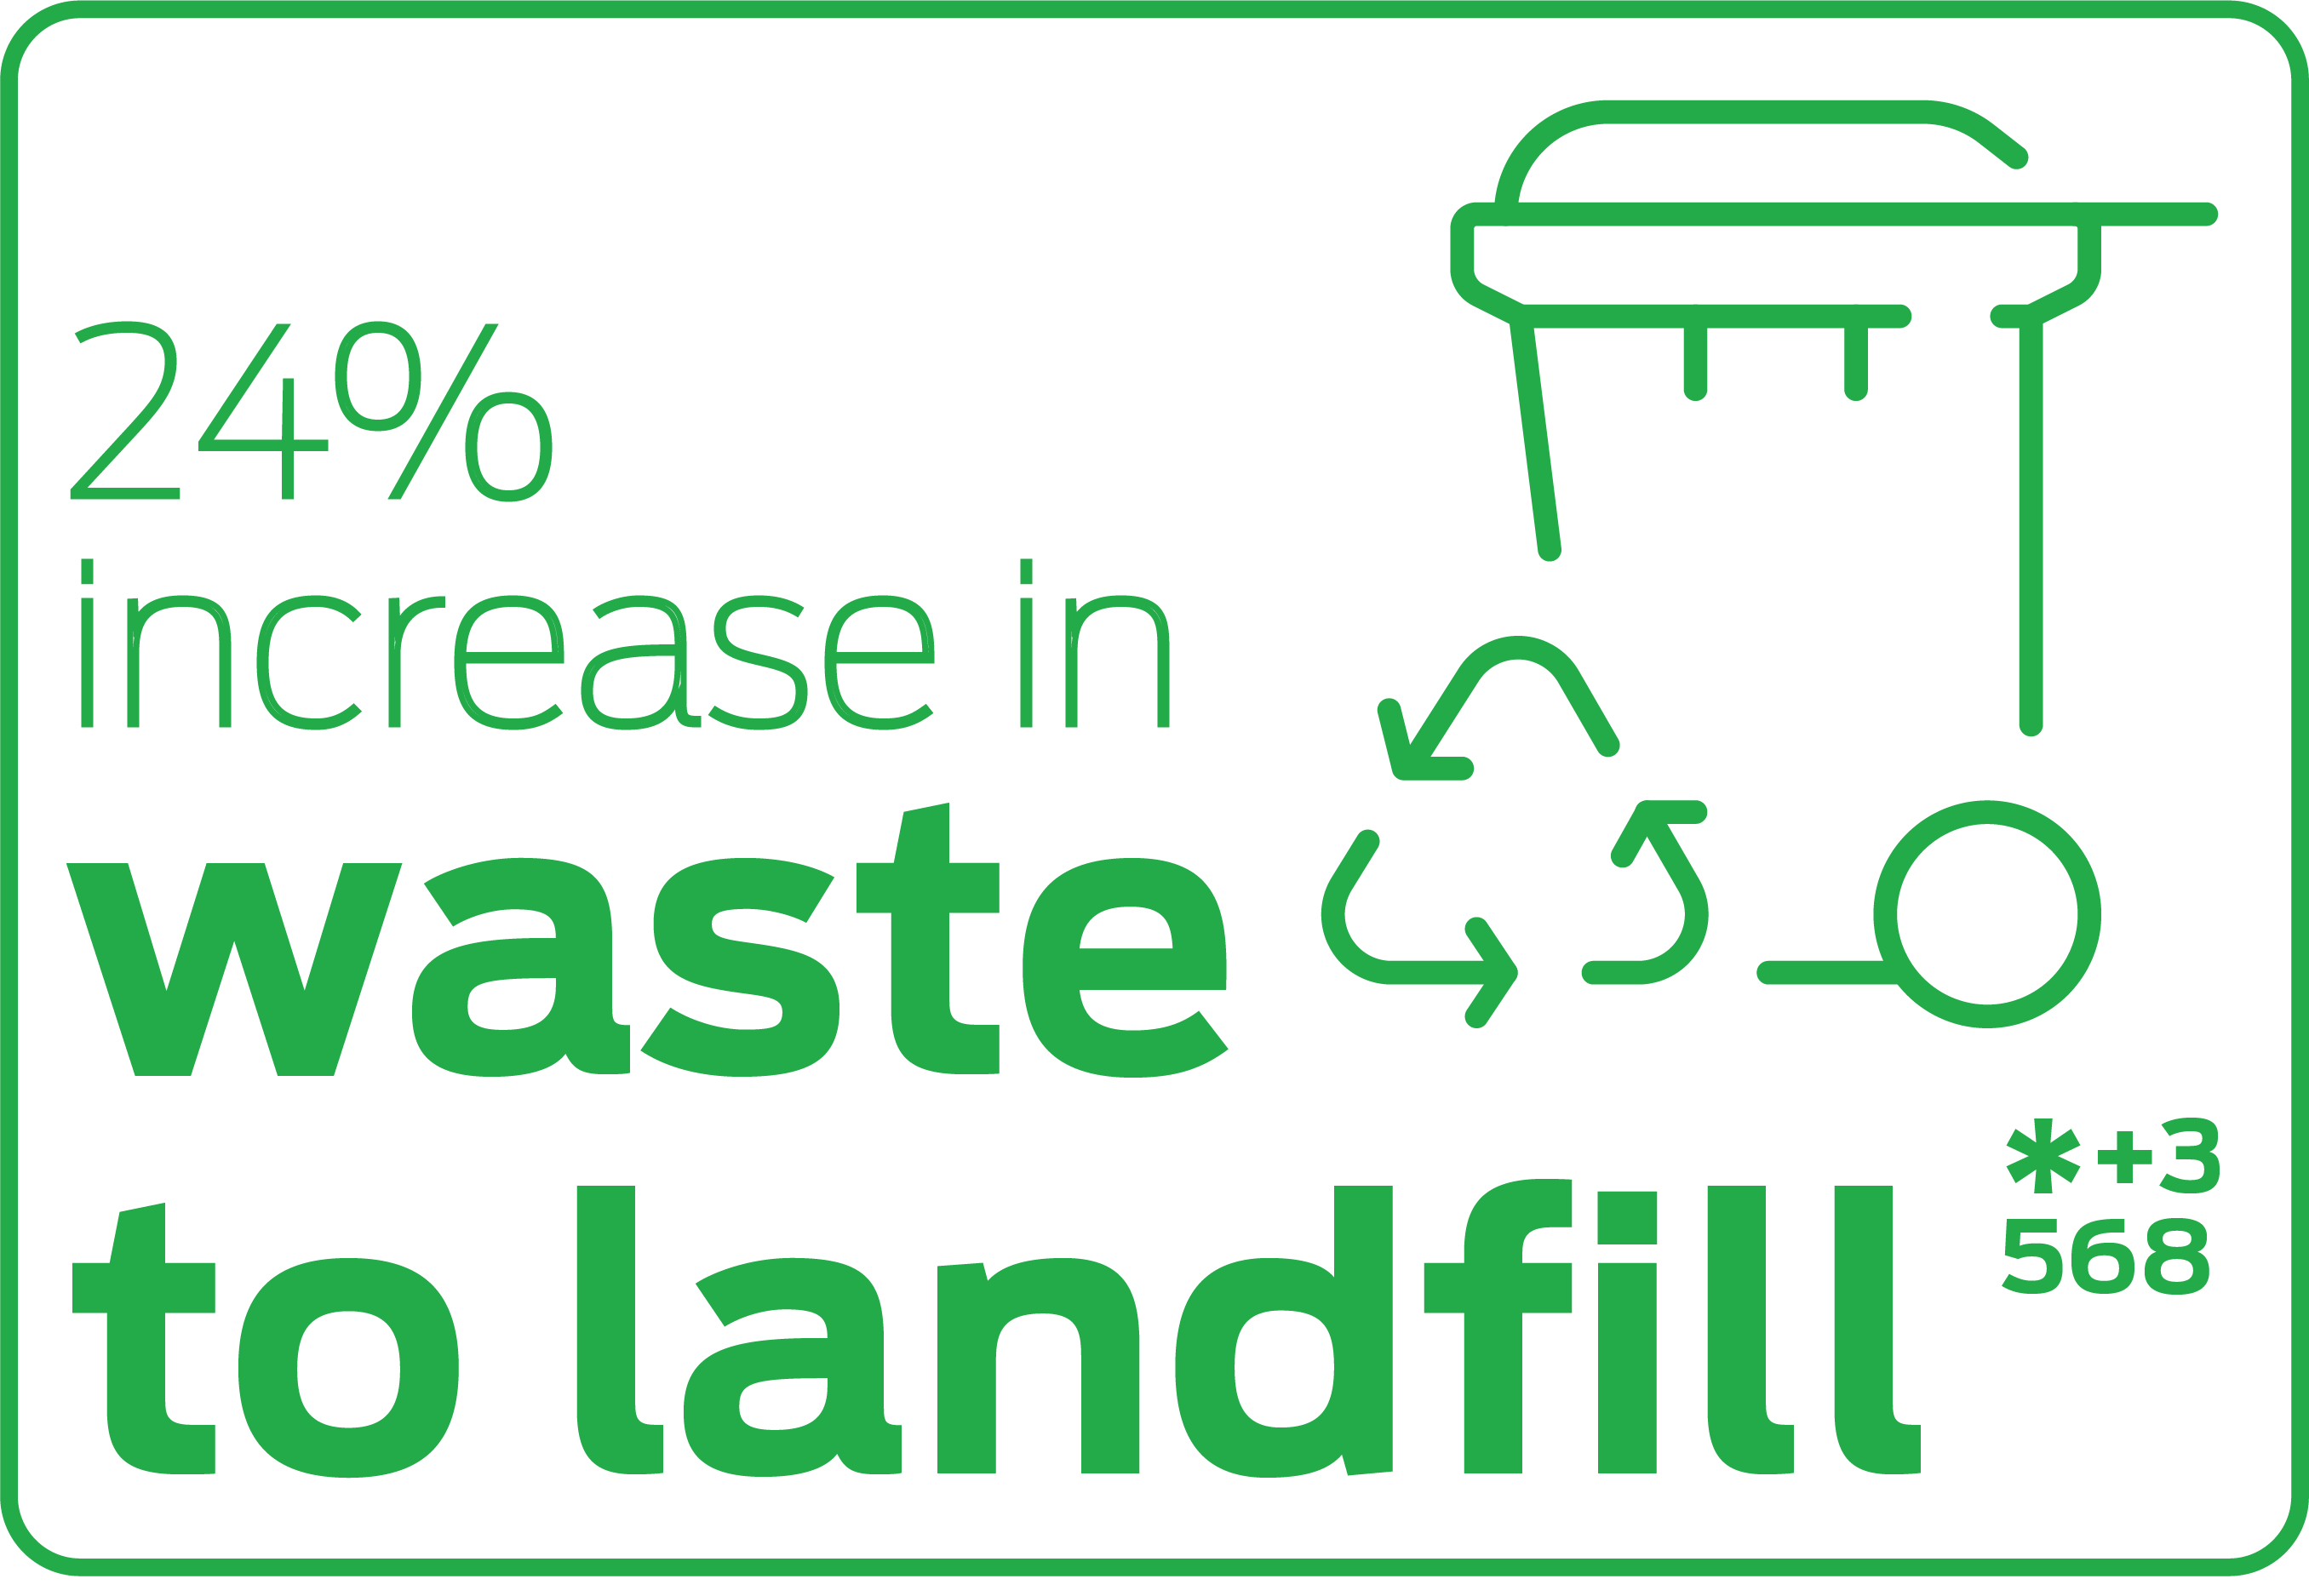 24% increase in waste to landfill